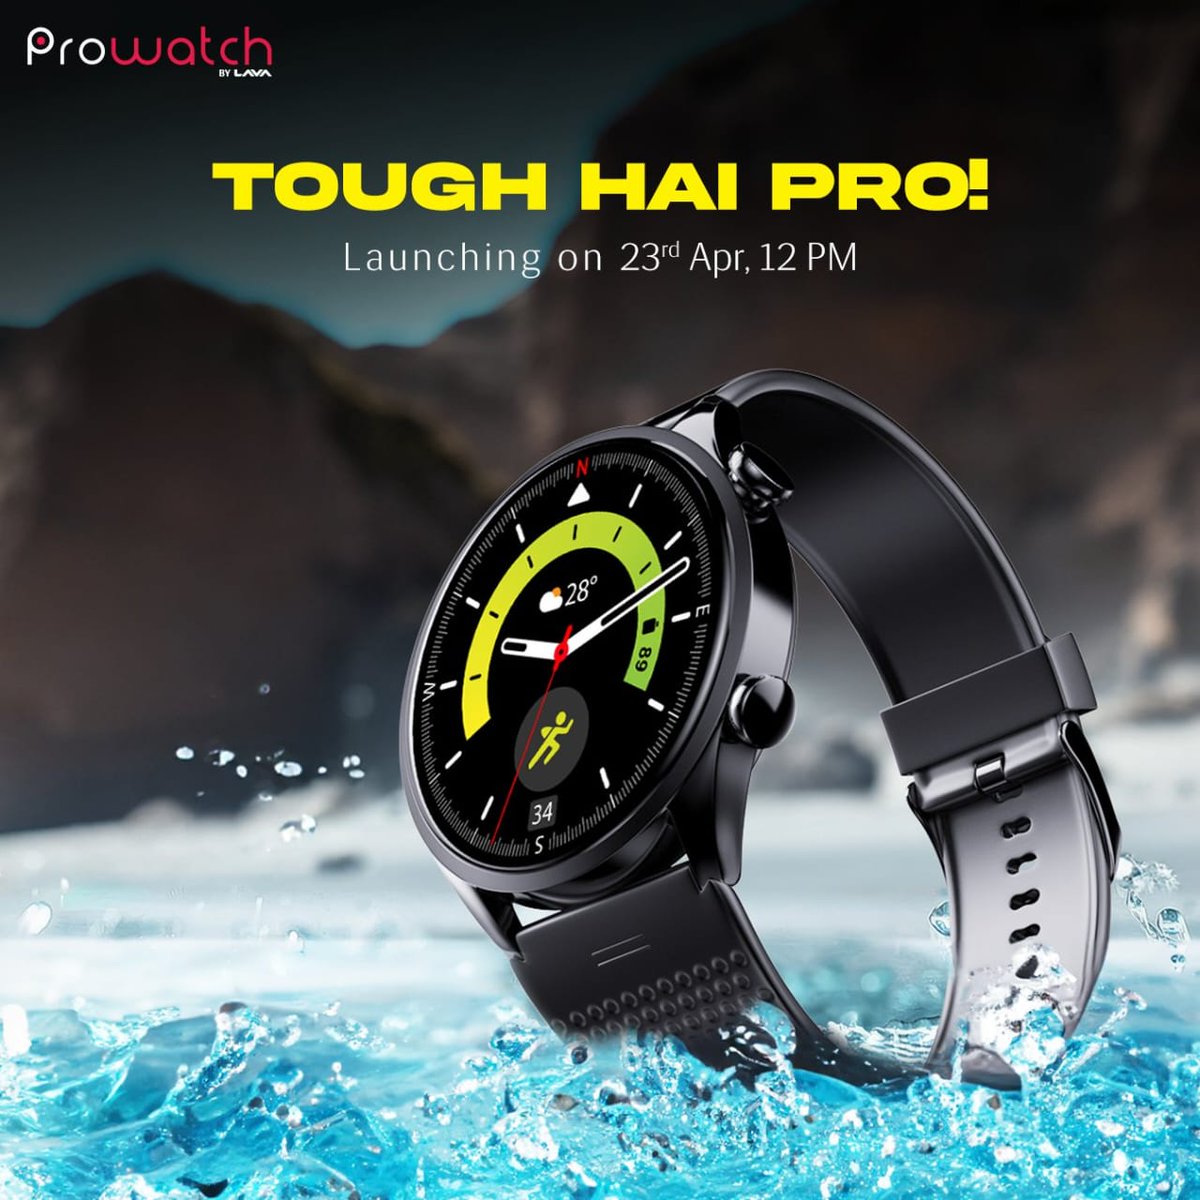 Tomorrow marks a new beginning! Stay tuned as #ProwatchLaunchTomorrow changes the game in wearable tech.